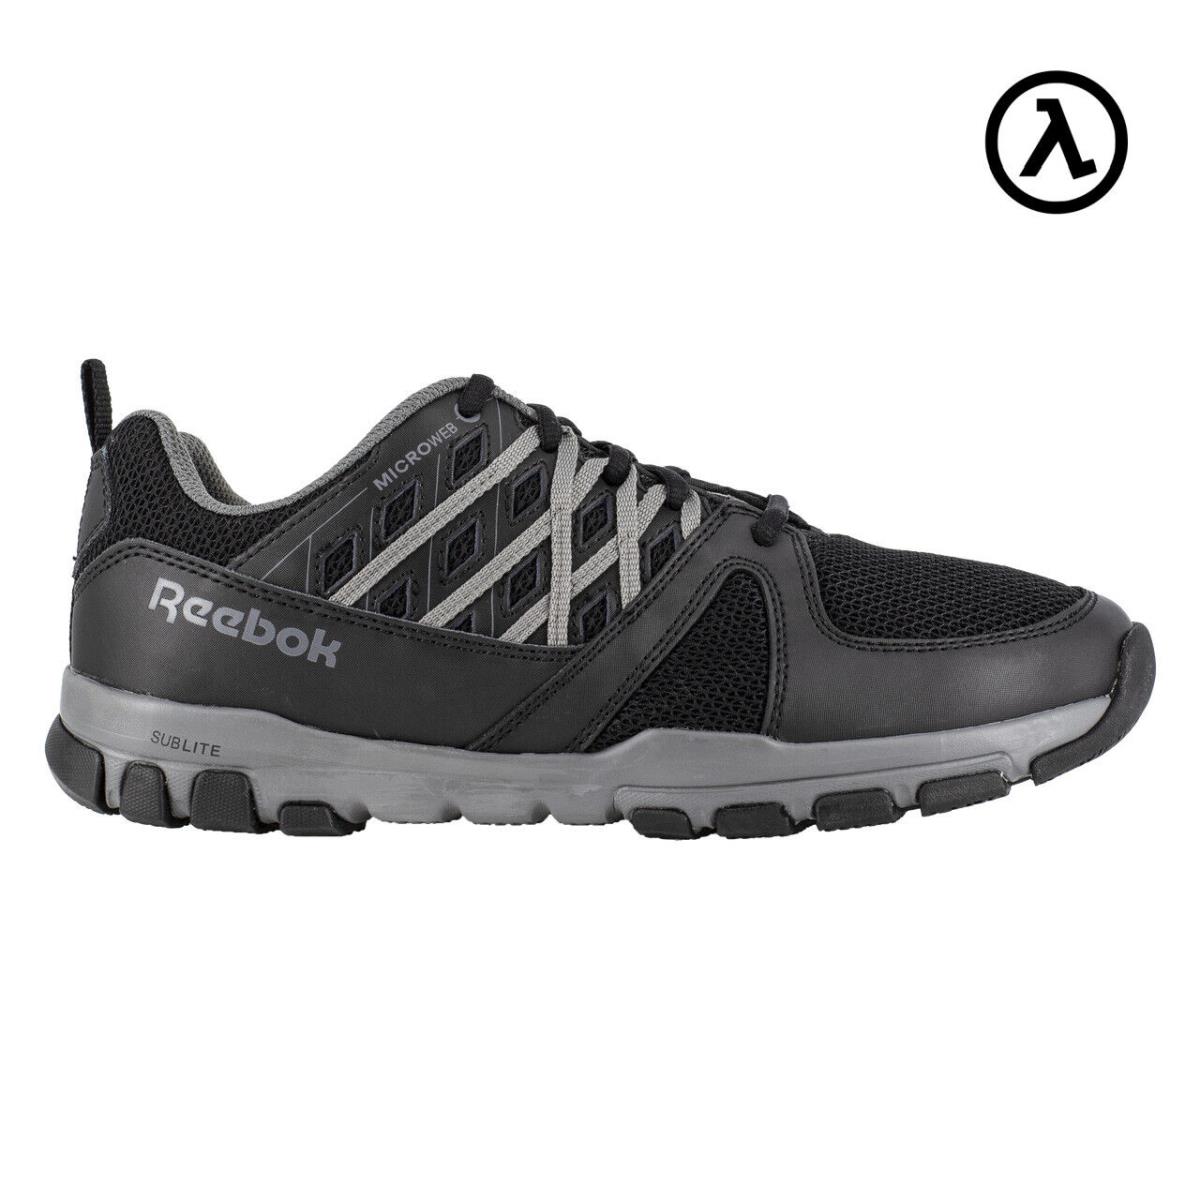 Reebok Sublite Work Women`s Athletic Shoe Black with Grey Trim Boots RB415